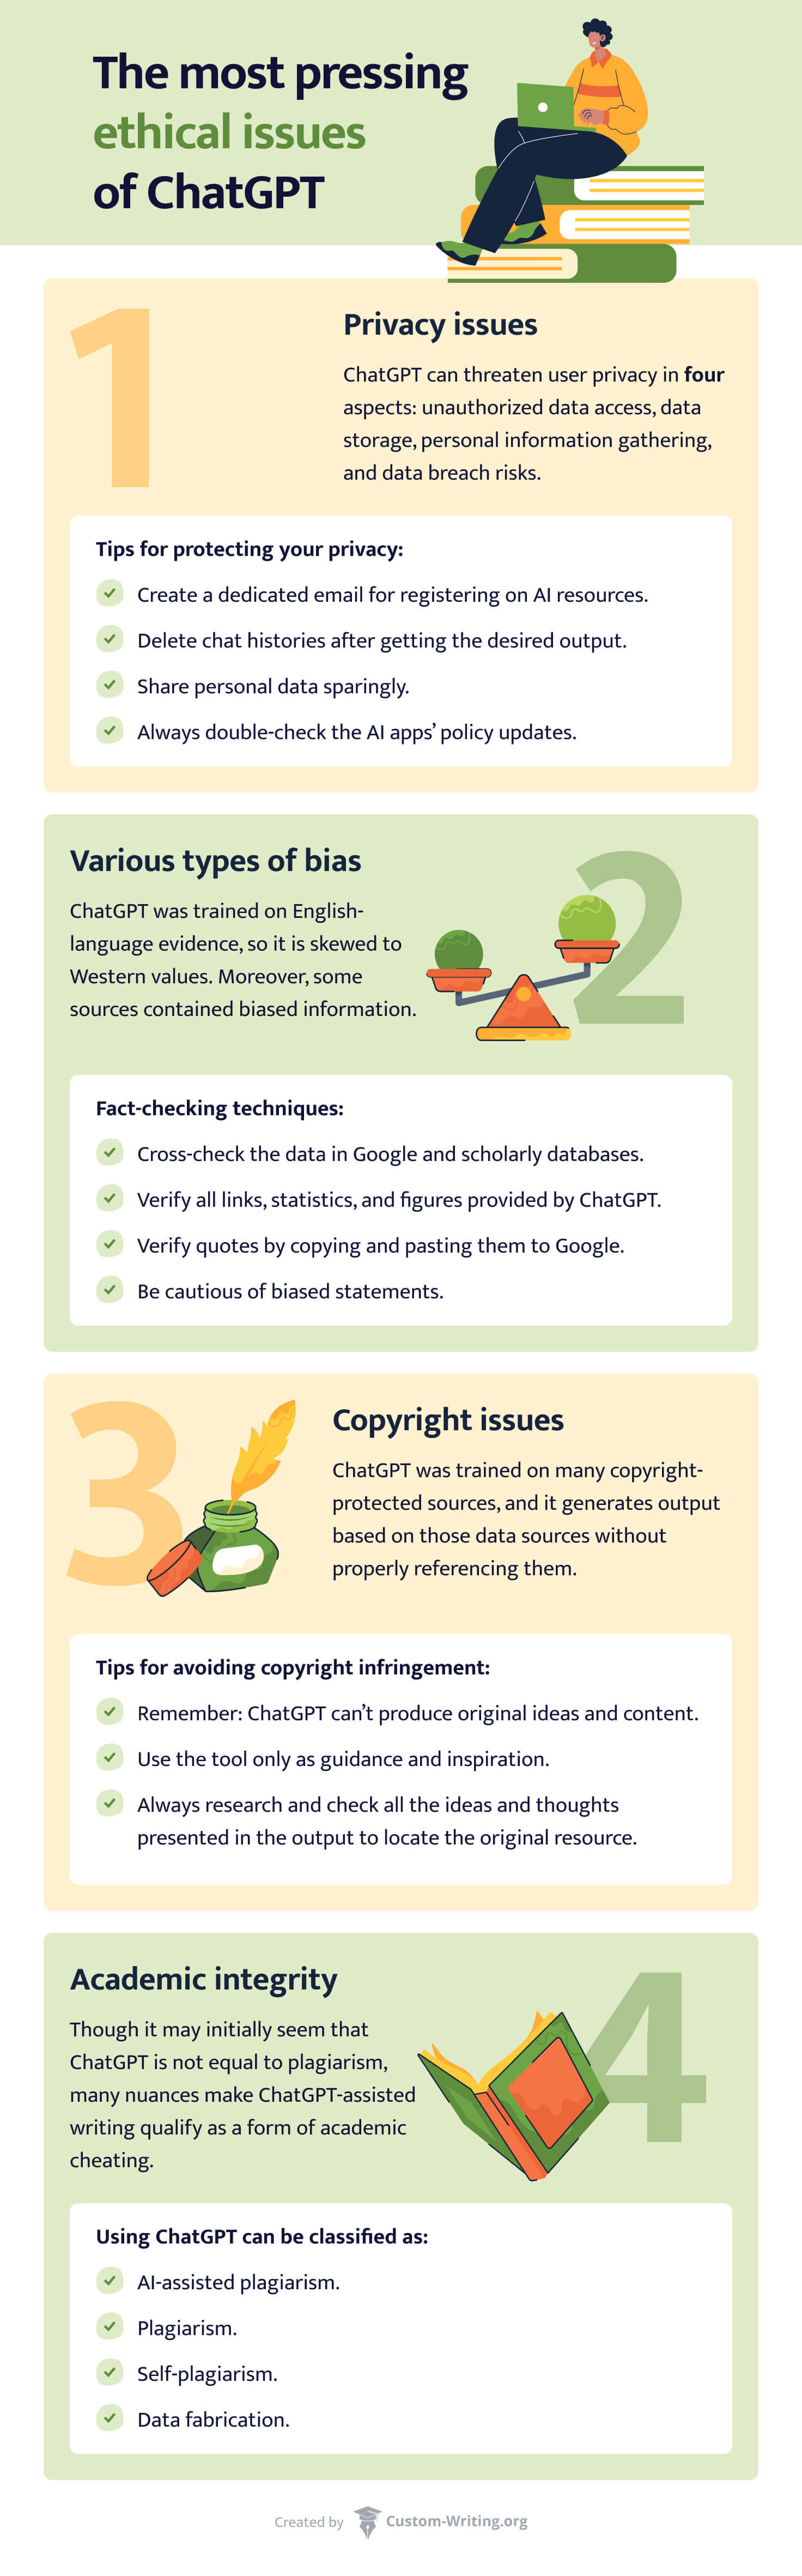 Infographic showing the most pressing ethical issues of ChatGPT and how to avoid them.